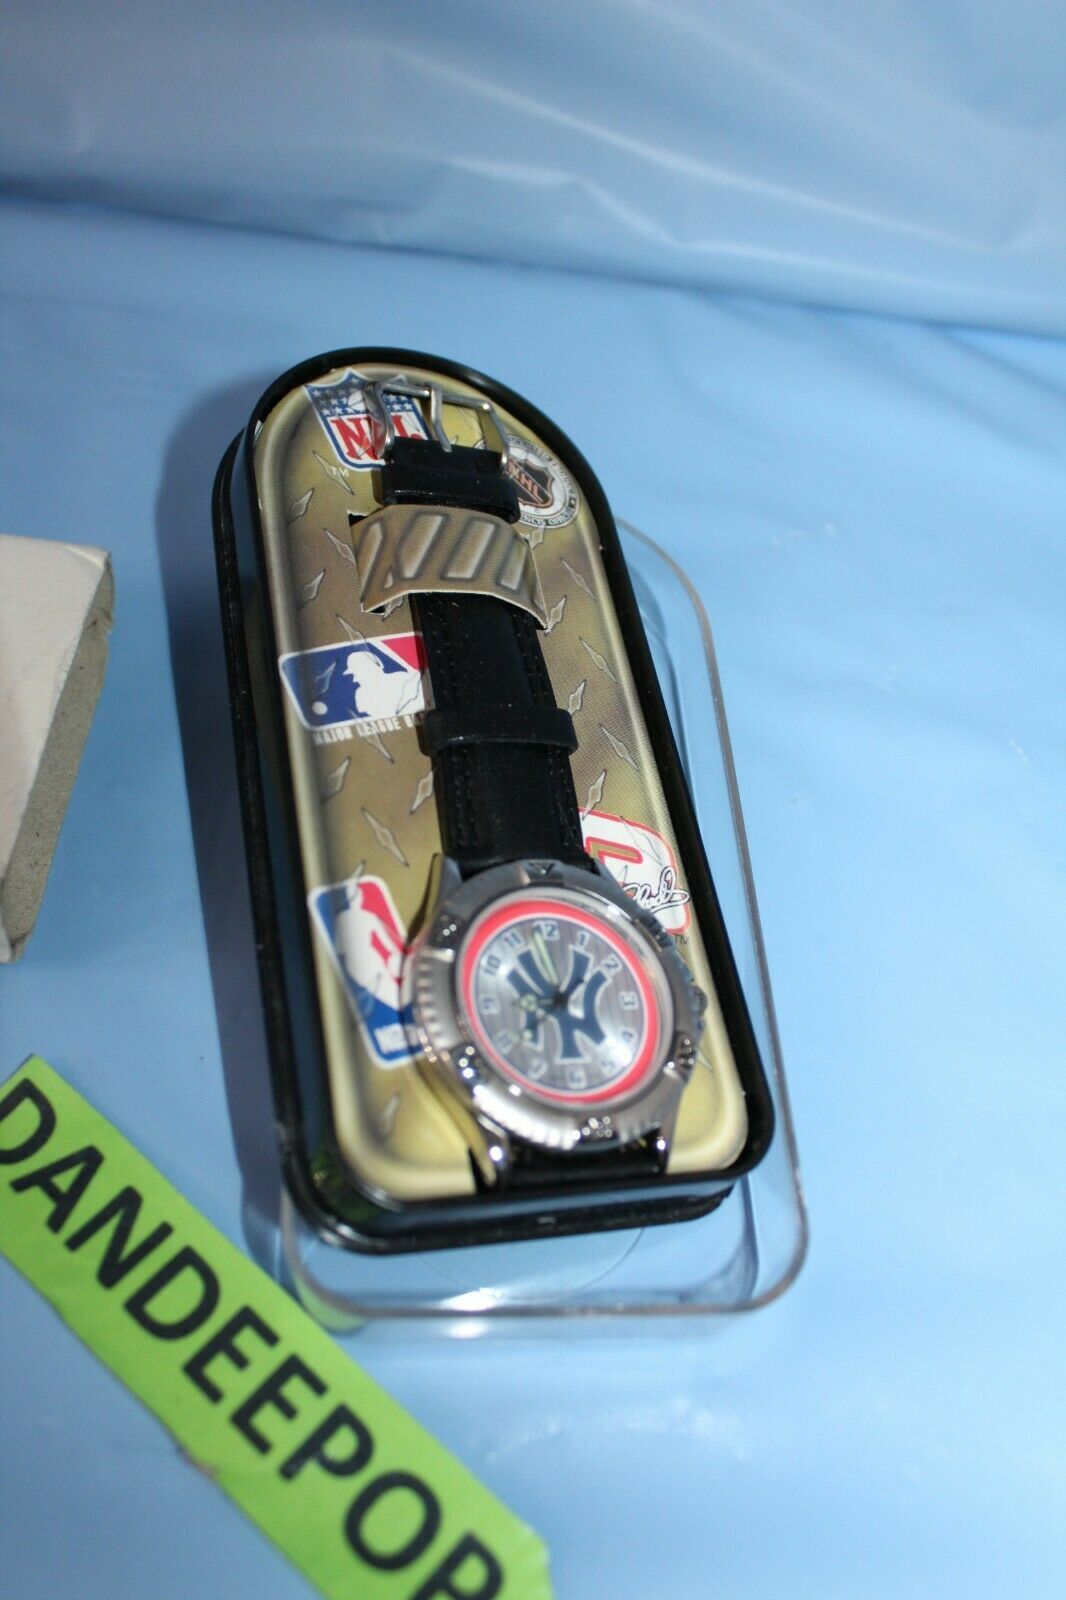 New York Yankees Avon MLB 1998 Sport Champions Watch In Container NY Baseball - $69.29